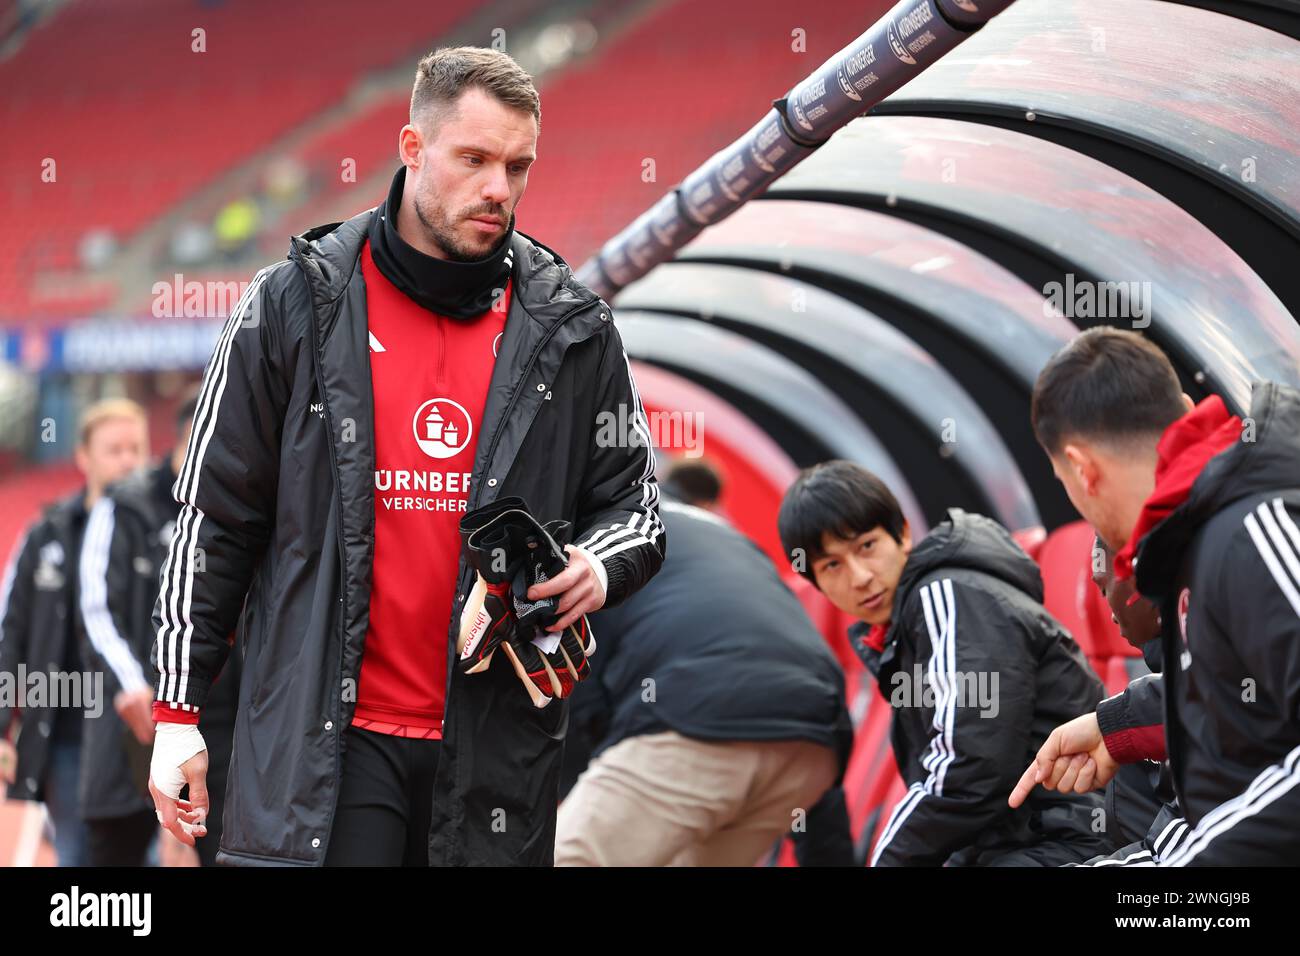 Nuremberg, Germany. 02nd Mar, 2024. Soccer: Bundesliga 2, 1. FC Nuremberg - Eintracht Braunschweig, matchday 24 at the Max Morlock Stadium. Nuremberg goalkeeper Christian Mathenia comes to the substitutes' bench at the start of the match. Credit: Daniel Karmann/dpa - IMPORTANT NOTE: In accordance with the regulations of the DFL German Football League and the DFB German Football Association, it is prohibited to utilize or have utilized photographs taken in the stadium and/or of the match in the form of sequential images and/or video-like photo series./dpa/Alamy Live News Stock Photo